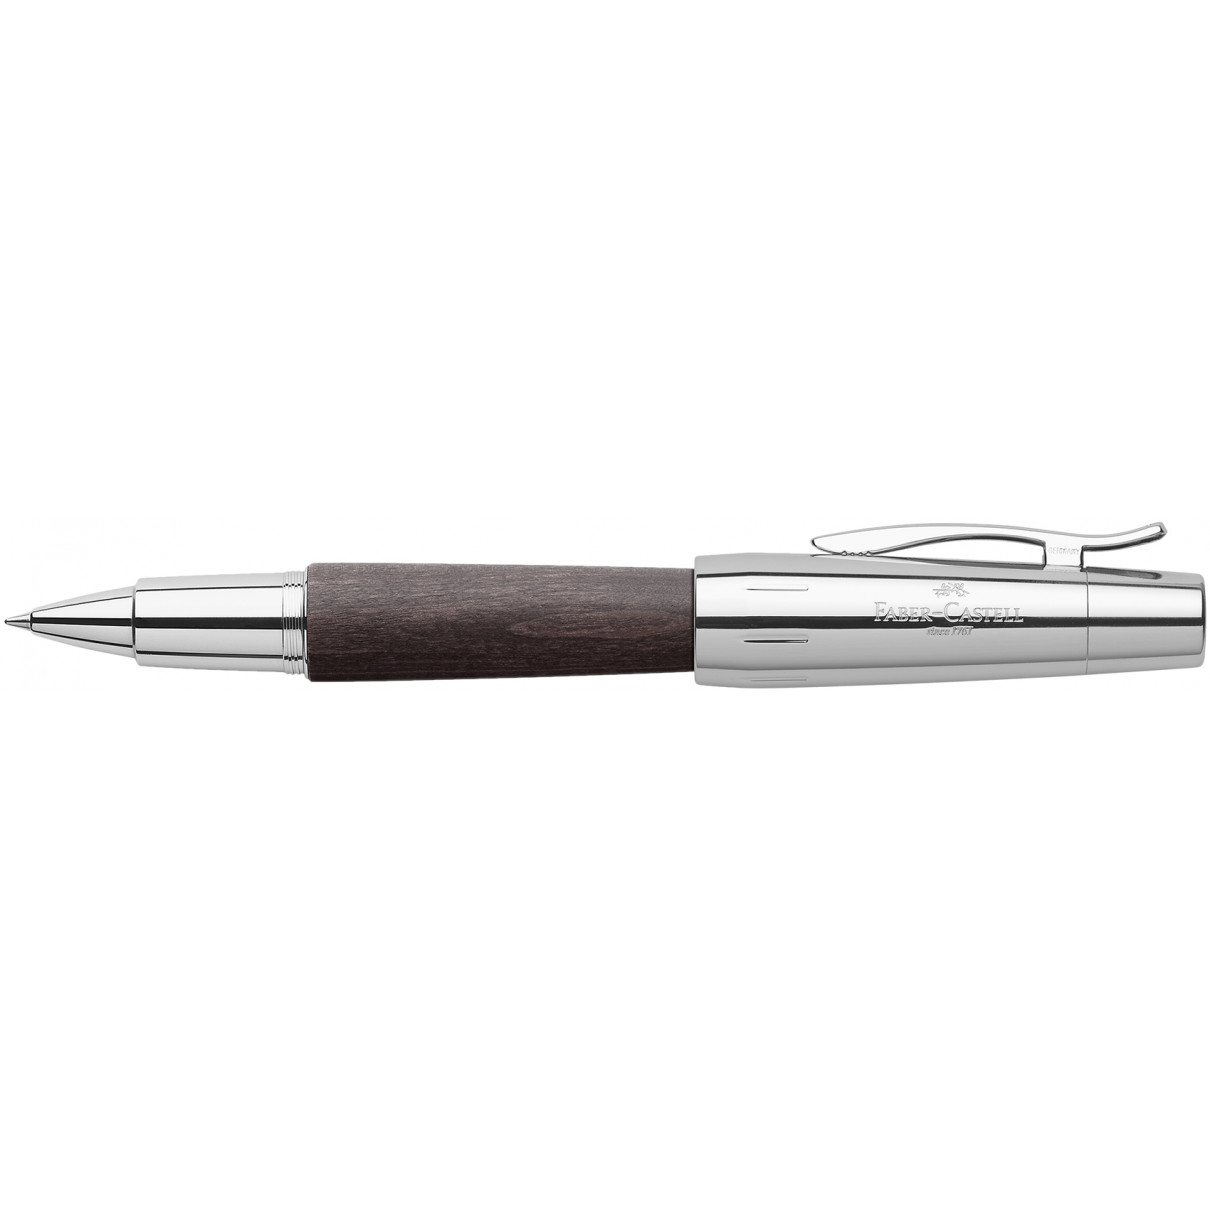 Faber-Castell e-motion Rollerball Pen - Black Wood and Chrome